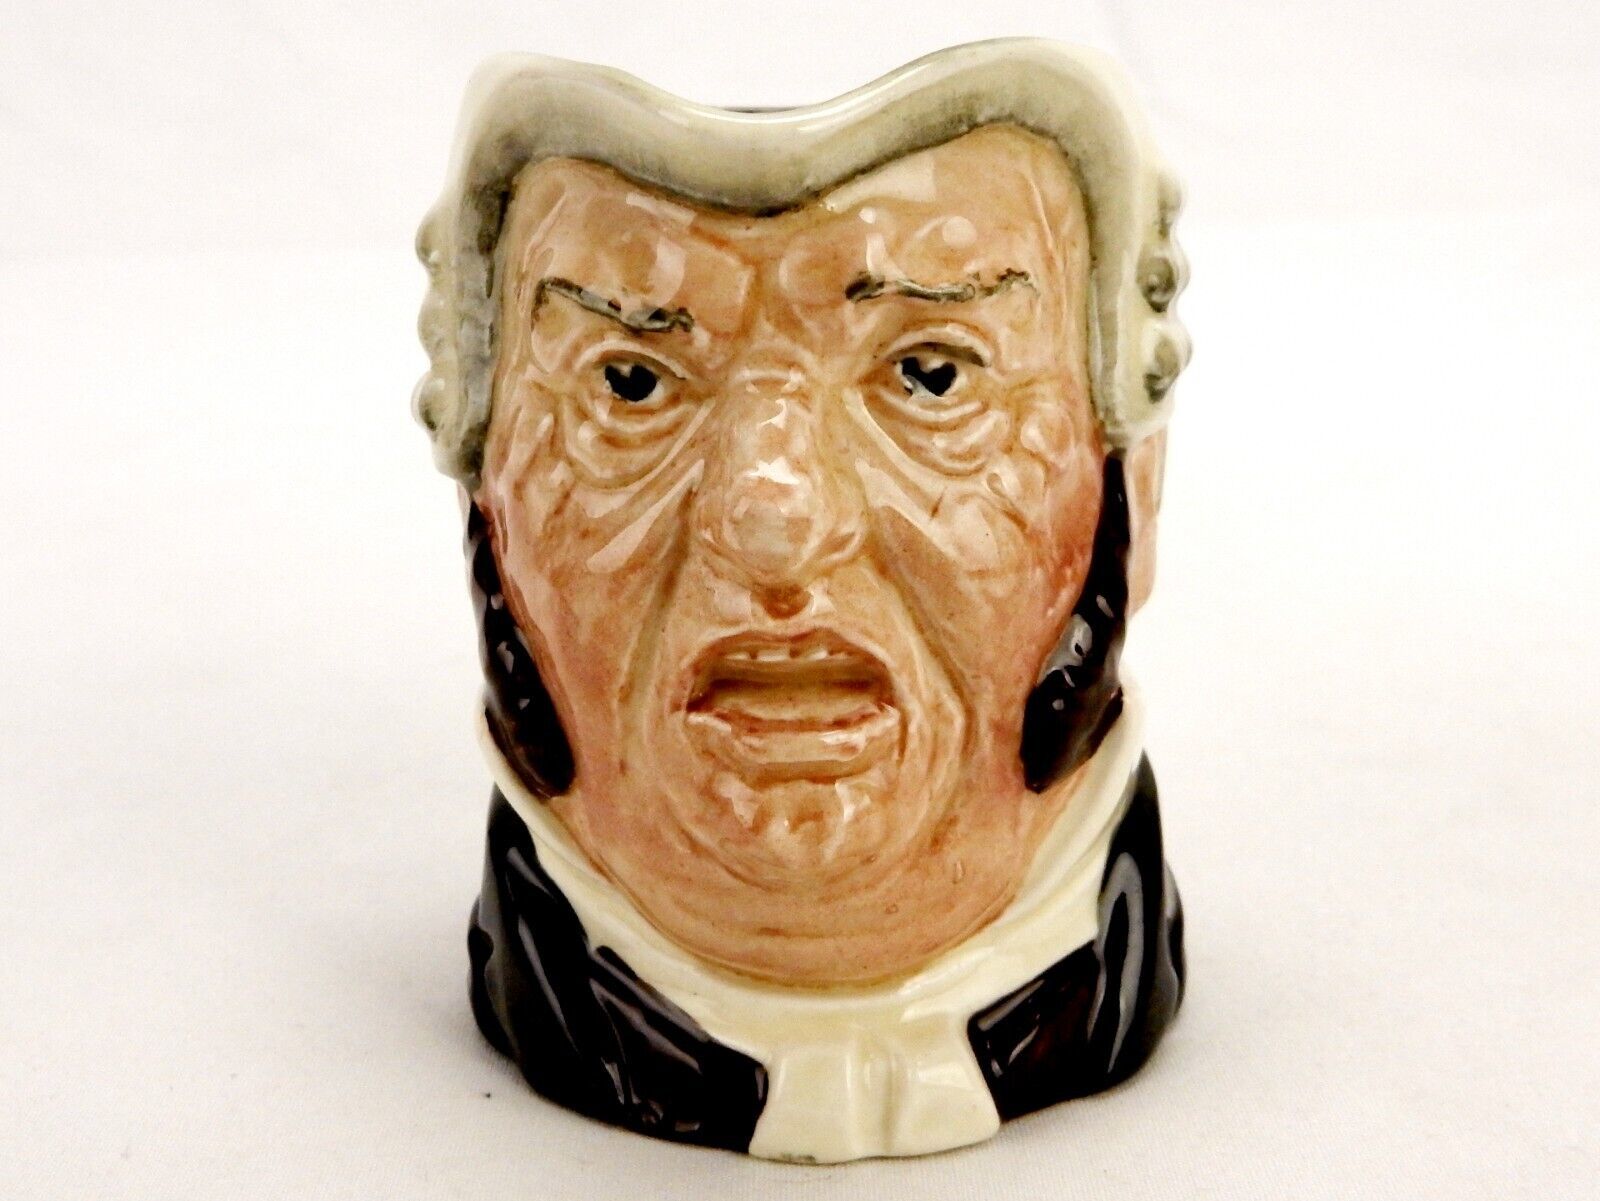 Primary image for Toby Character Jug, The Lawyer, D6504, Small, Royal Doulton Collectible, #RD-57